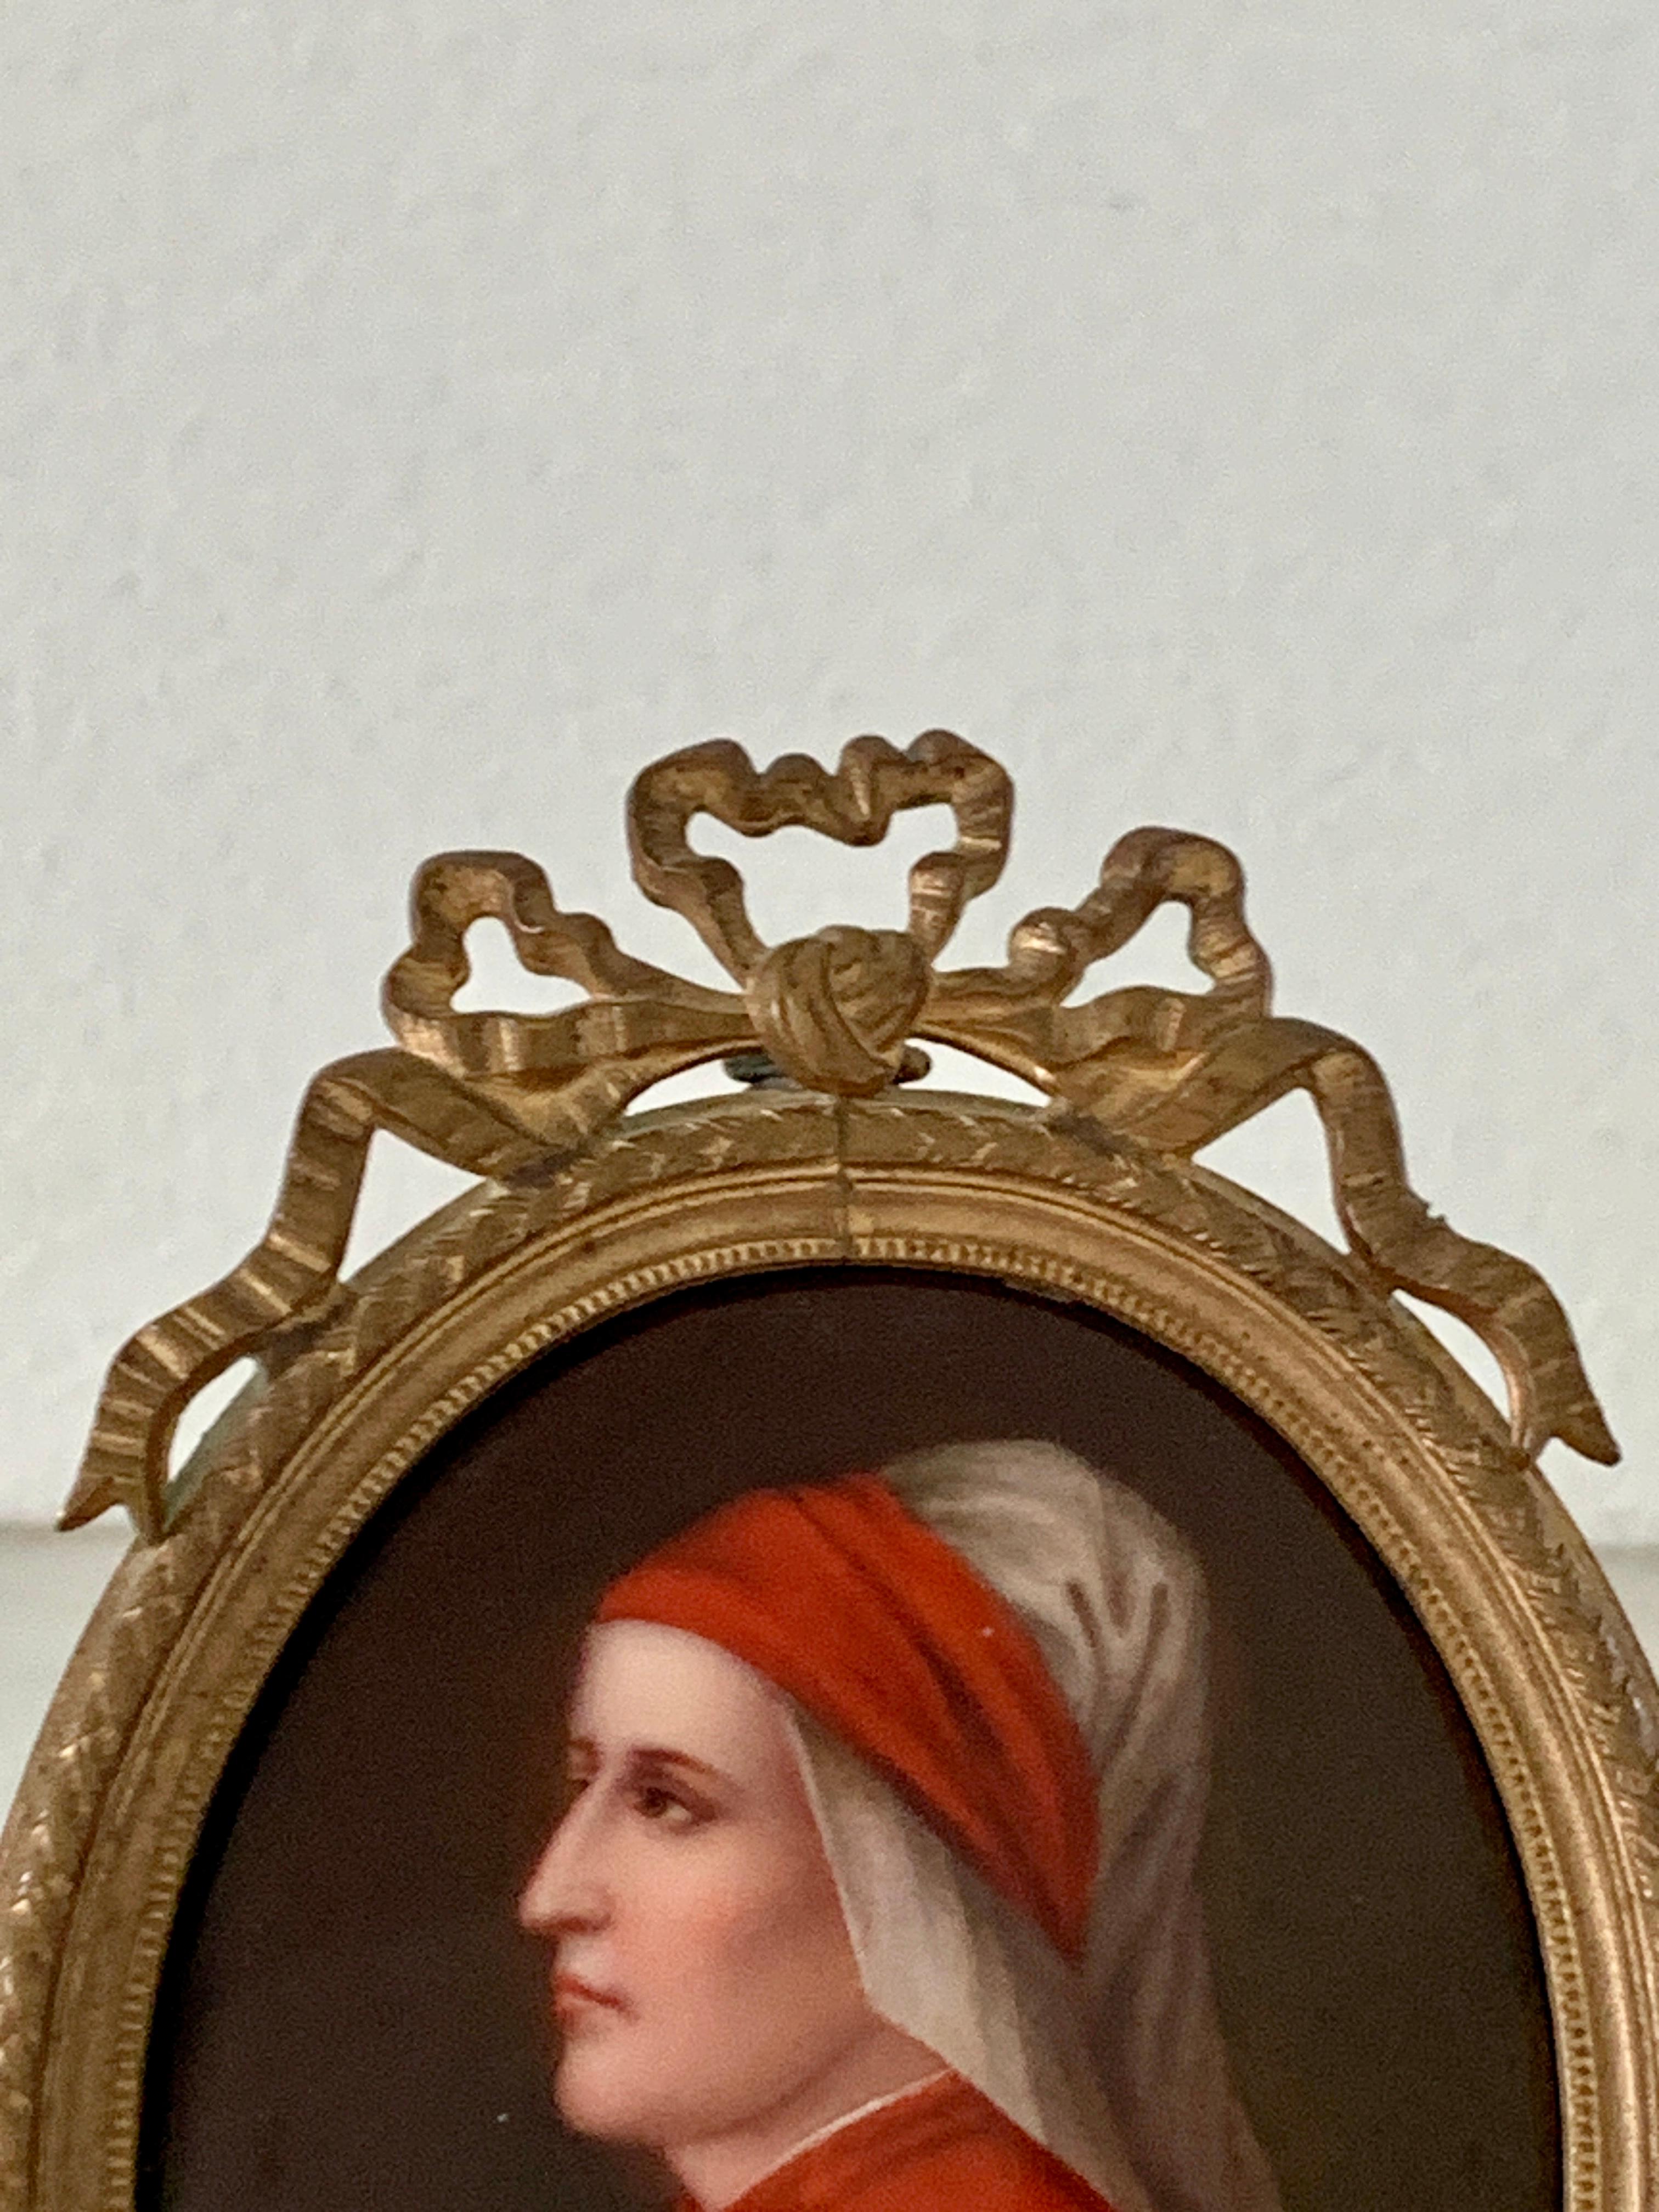 A stunning Italian Renaissance or Grand Tour miniature portrait of Italian Poet Dante Alighieria 

Italy, Late 19th Century

Oil on porcelain, presented in a brass frame

Measures: 3.13